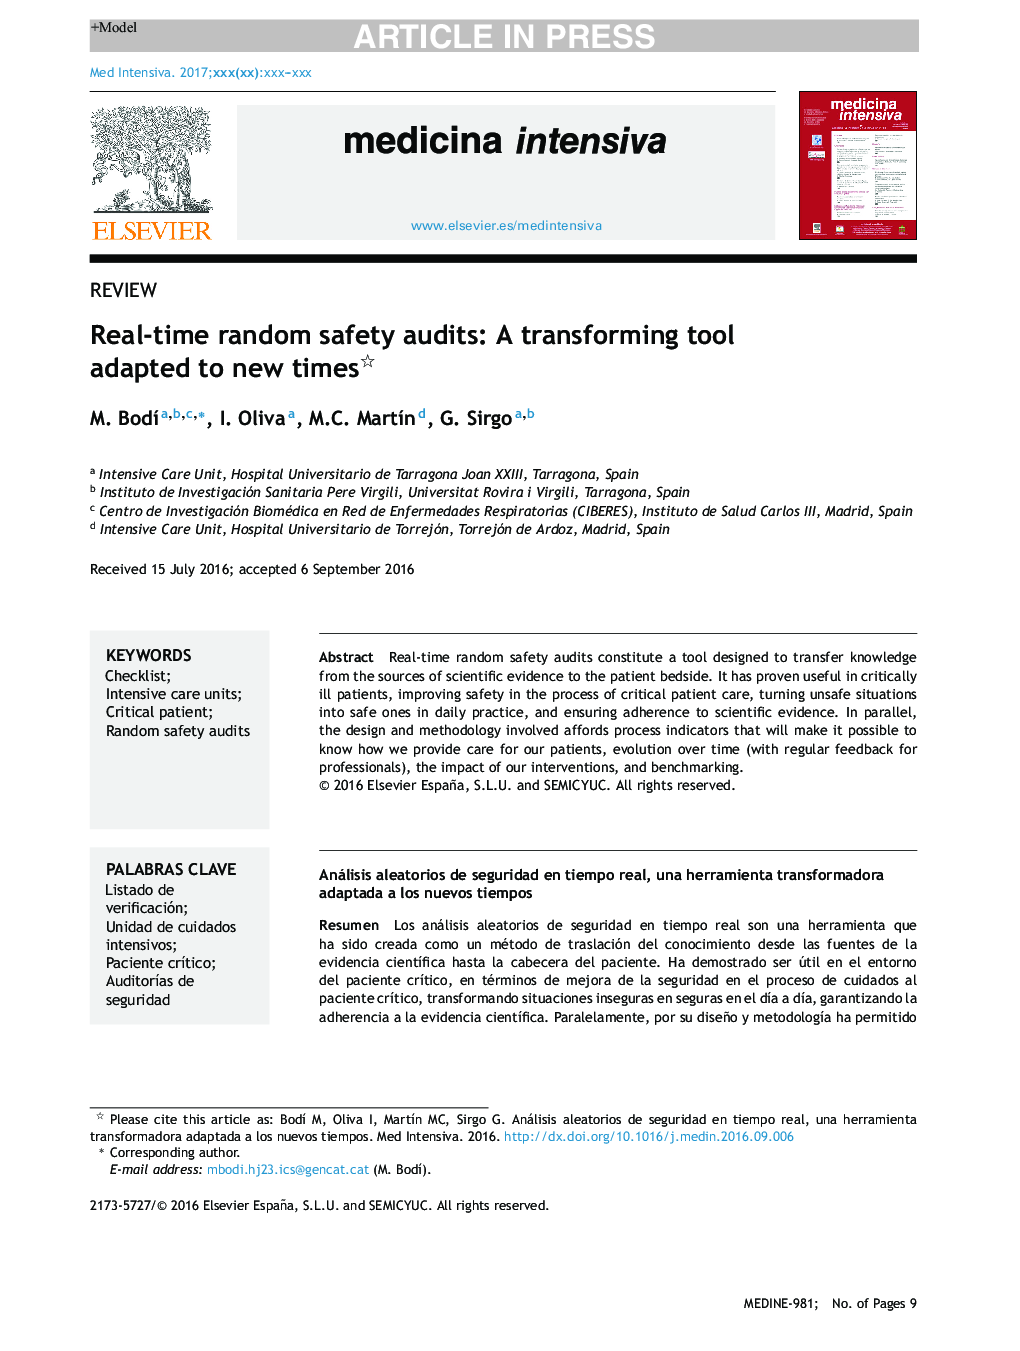 Real-time random safety audits: A transforming tool adapted to new times